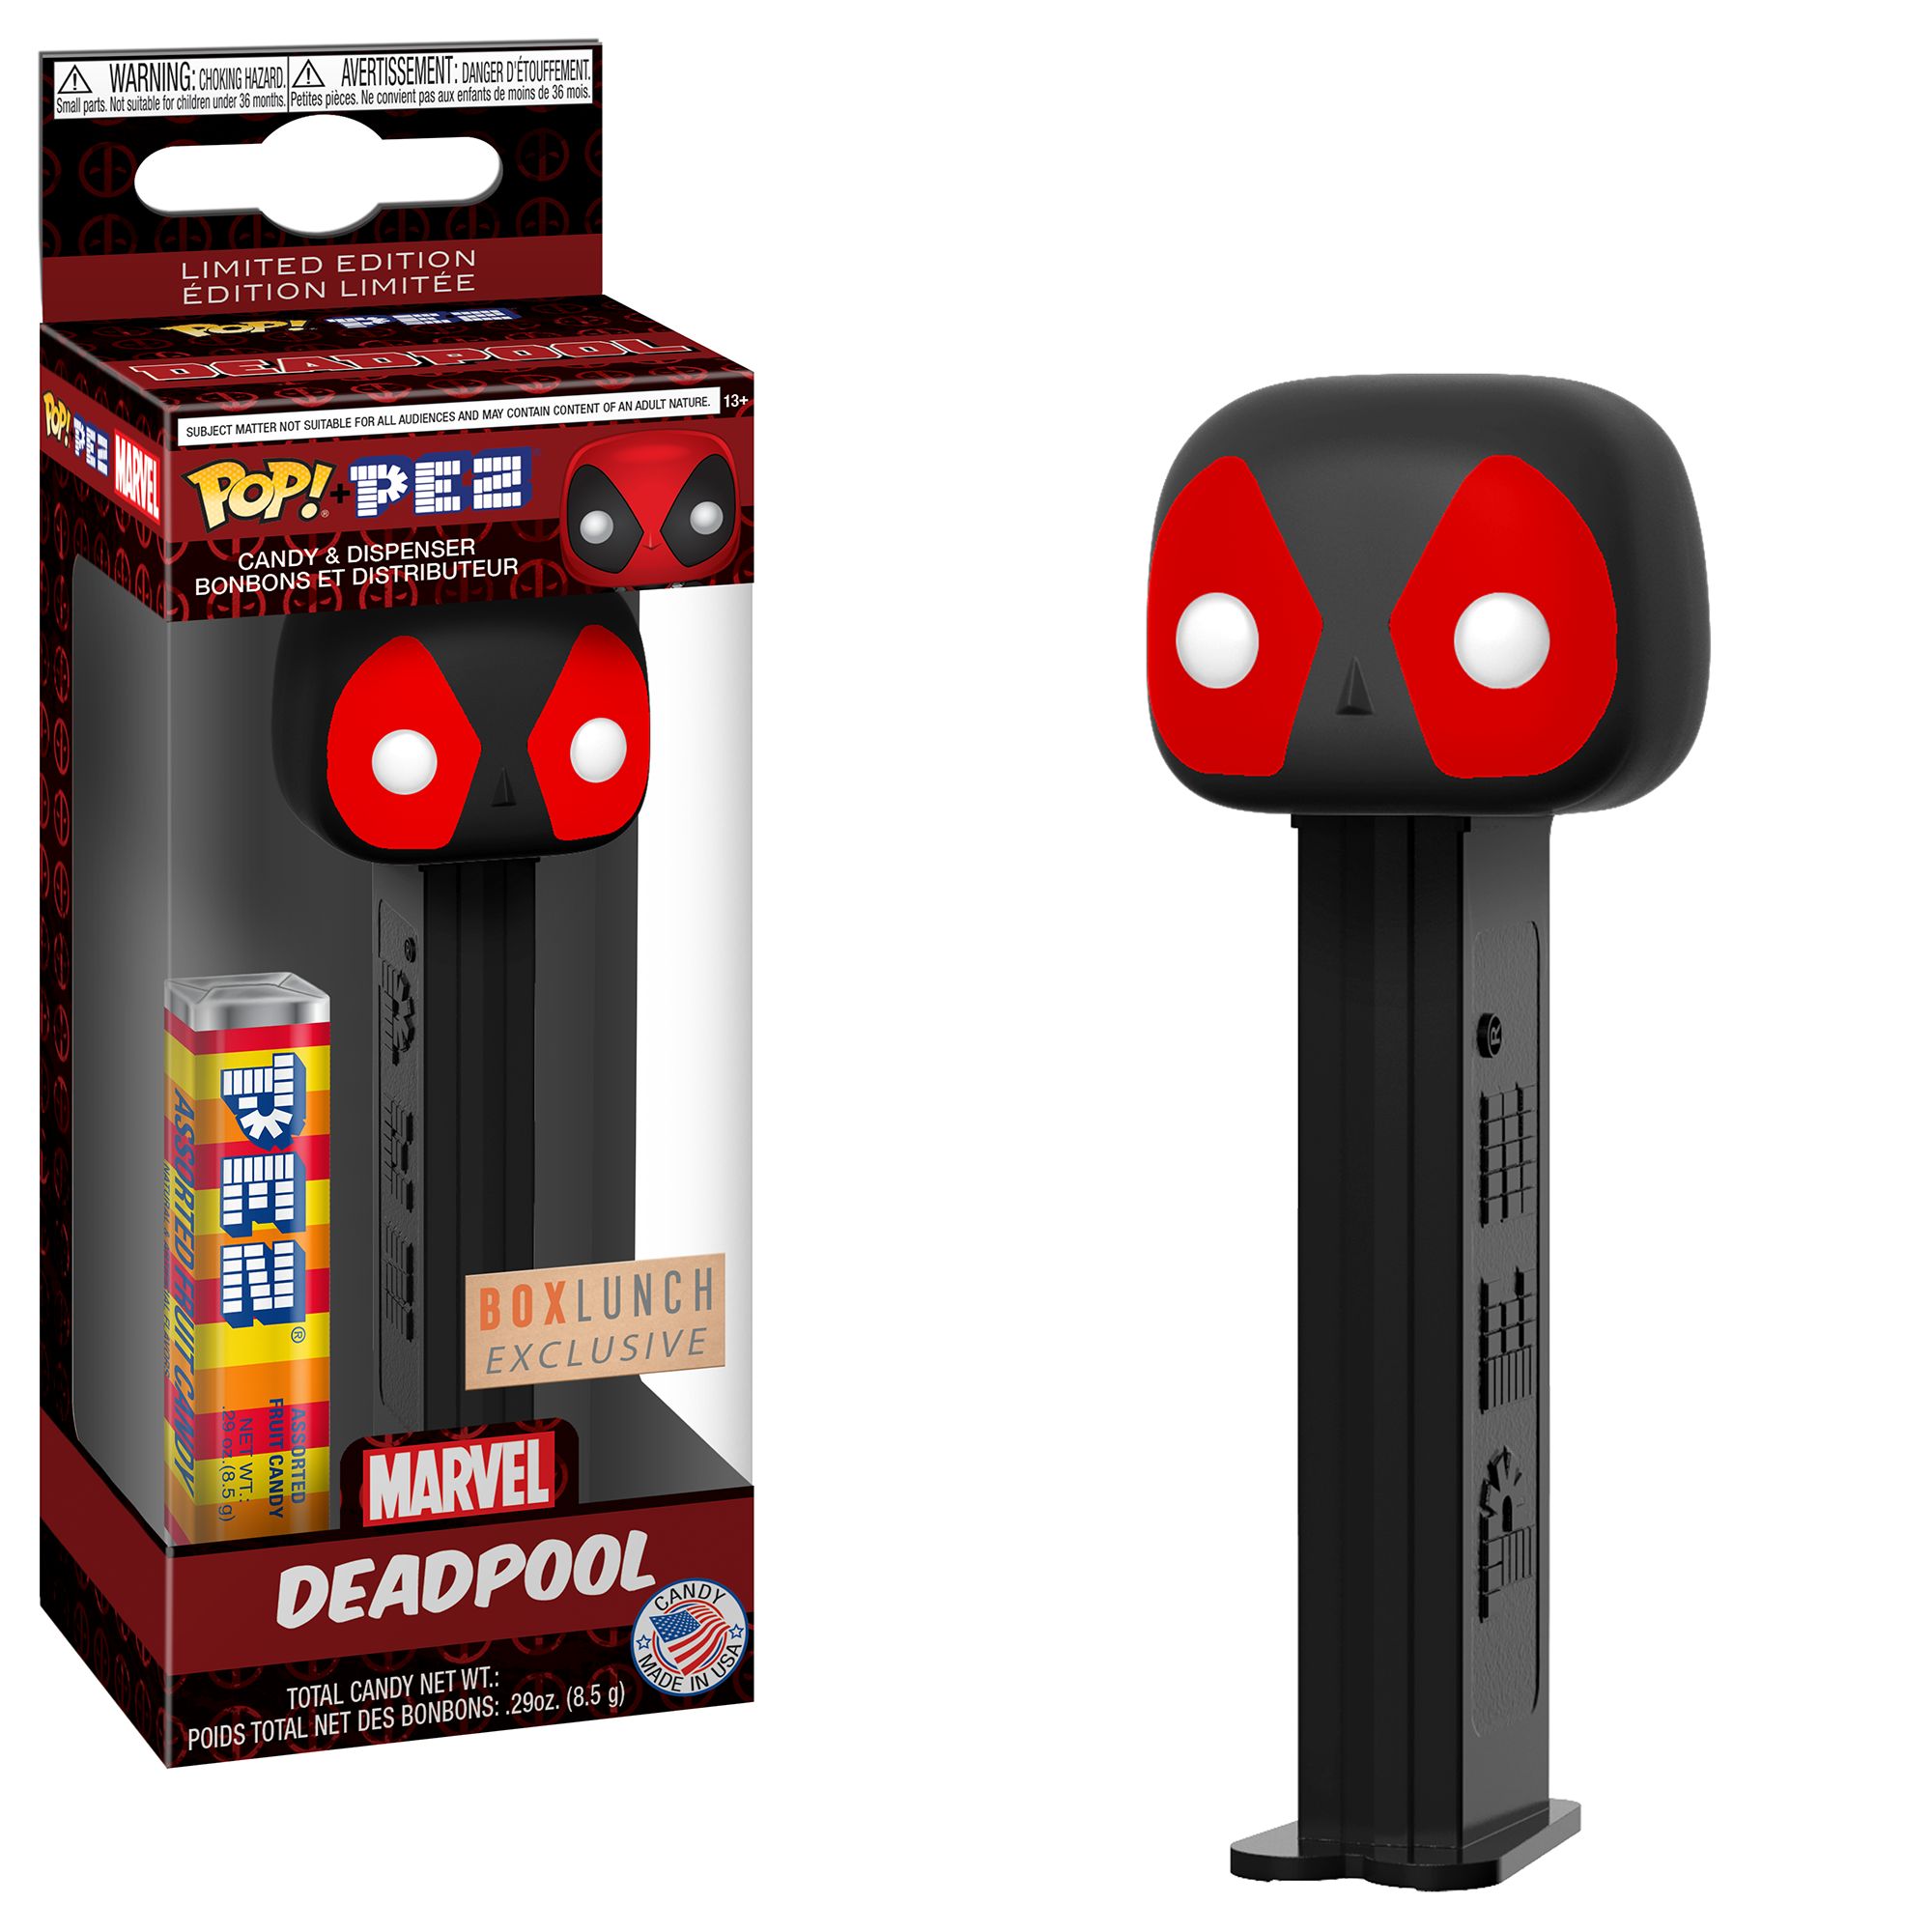 Funko, Hot Topic, and BoxLunch Team Up to Launch Marvel Pop! Pez